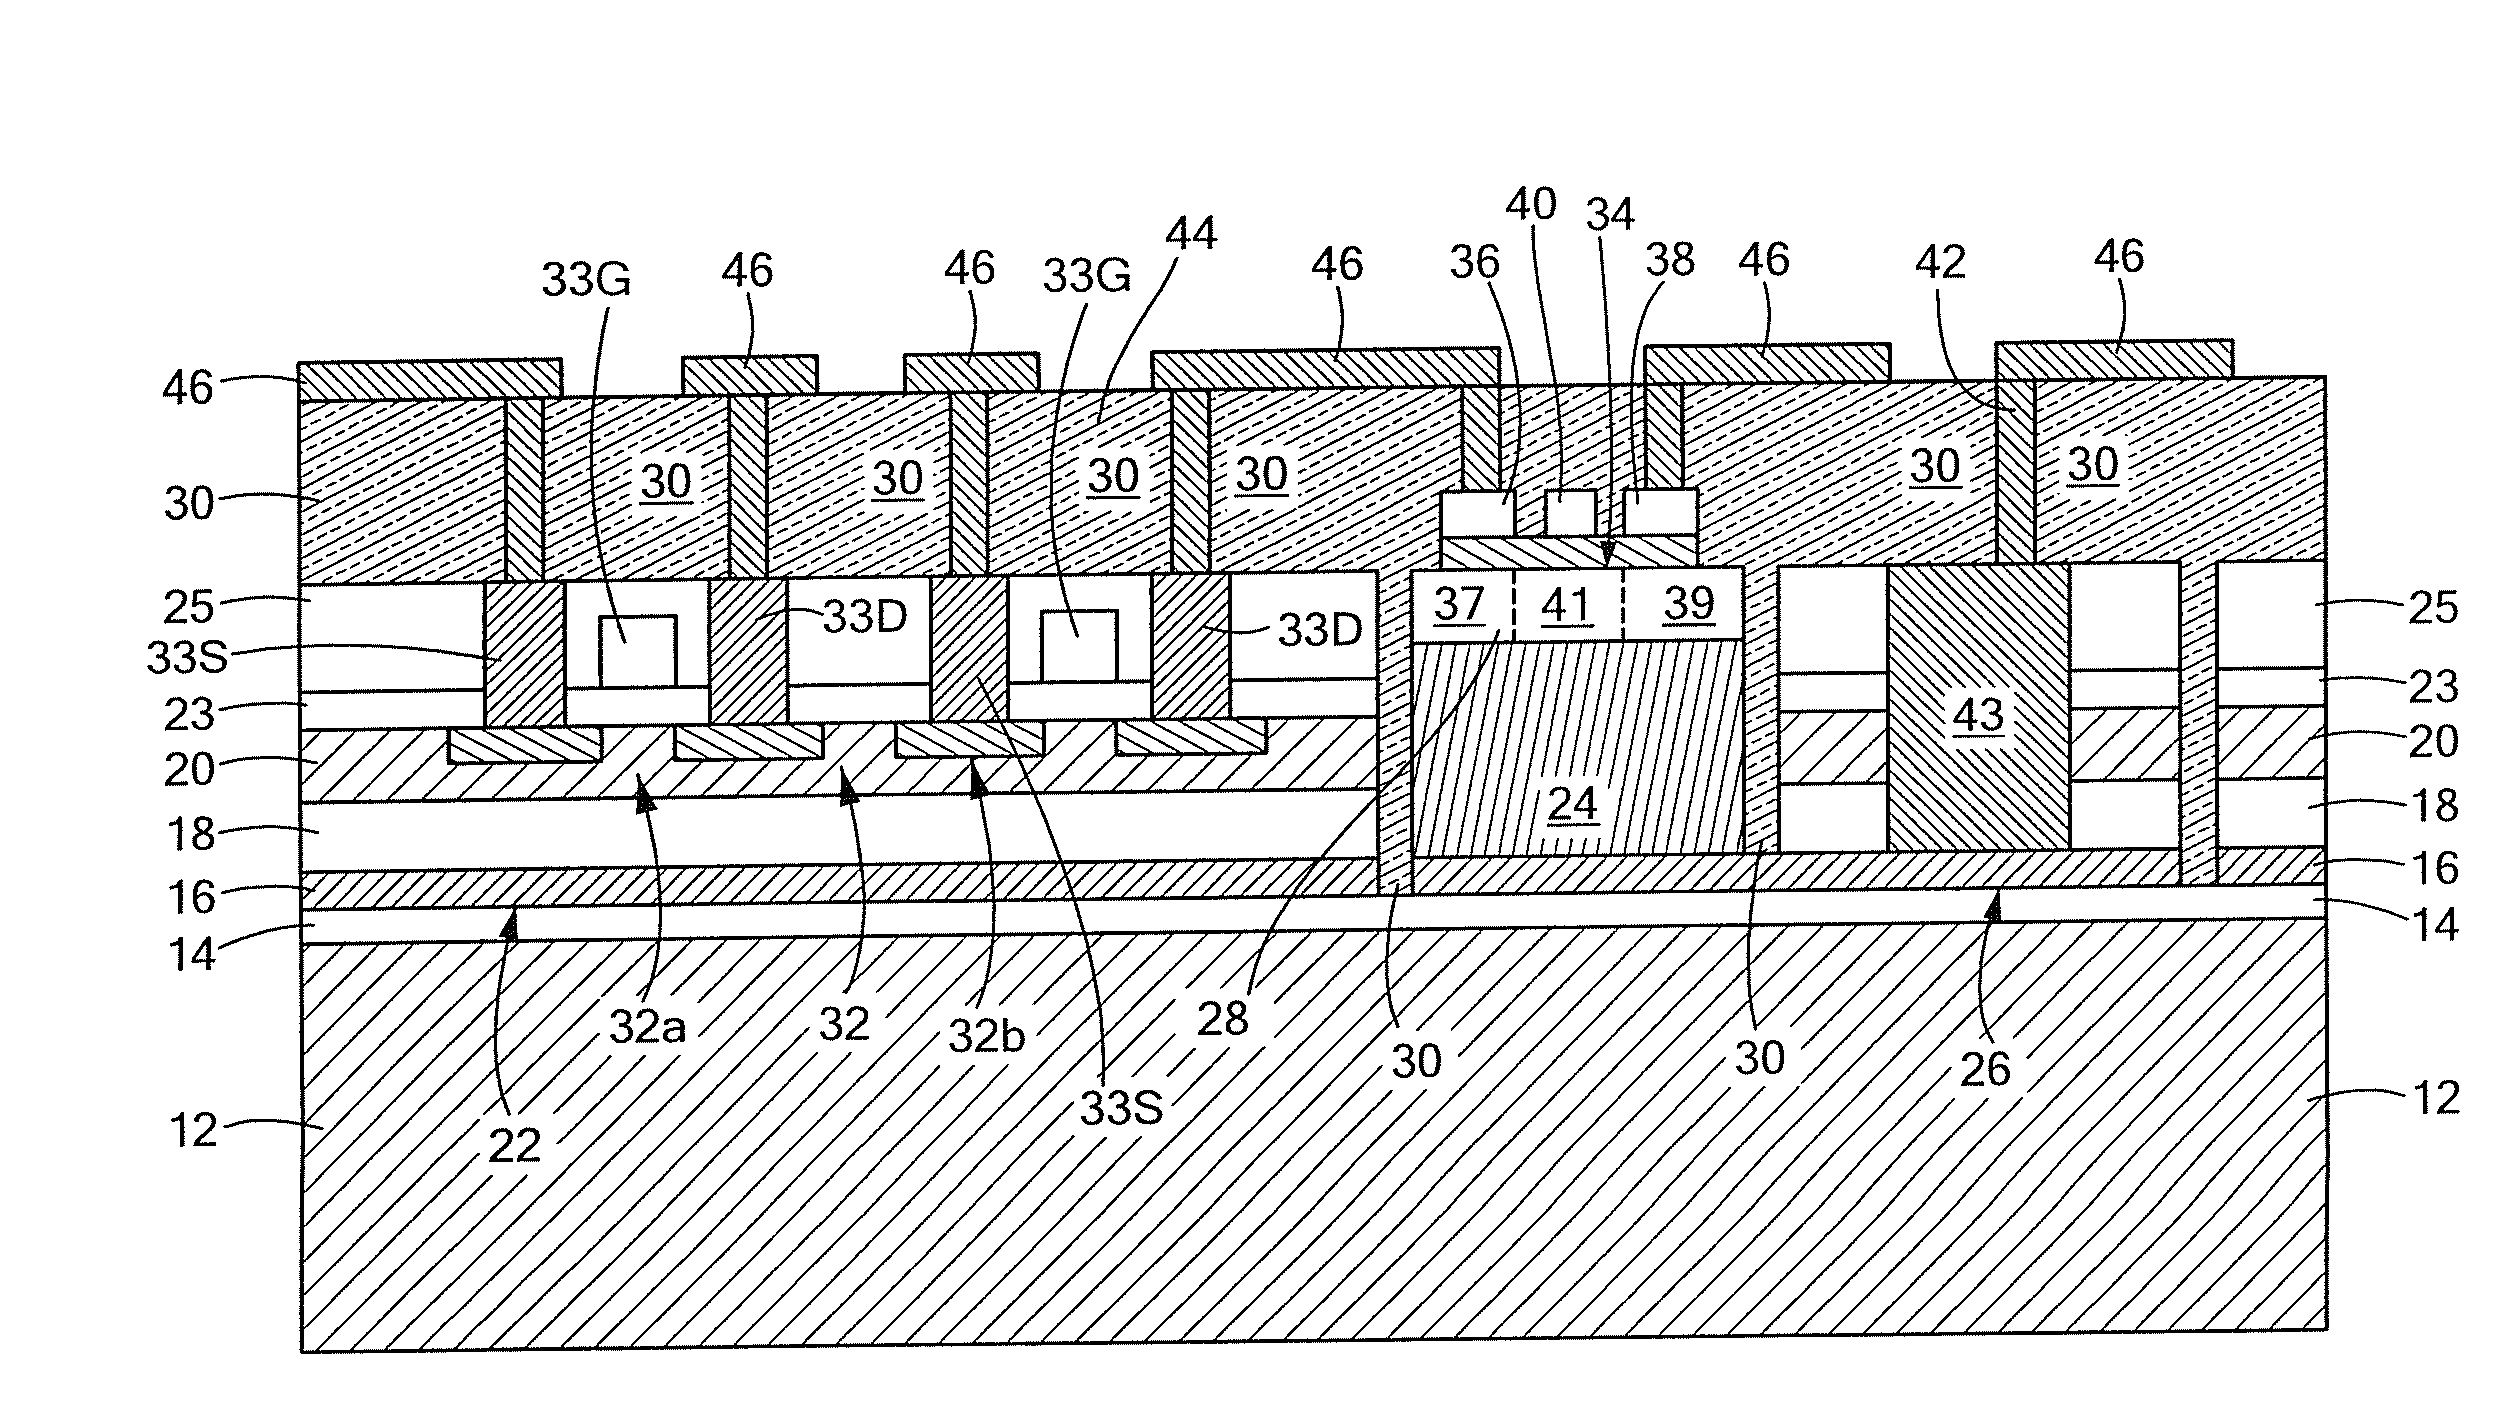 Semiconductor structures having both elemental and compound semiconductor devices on a common substrate